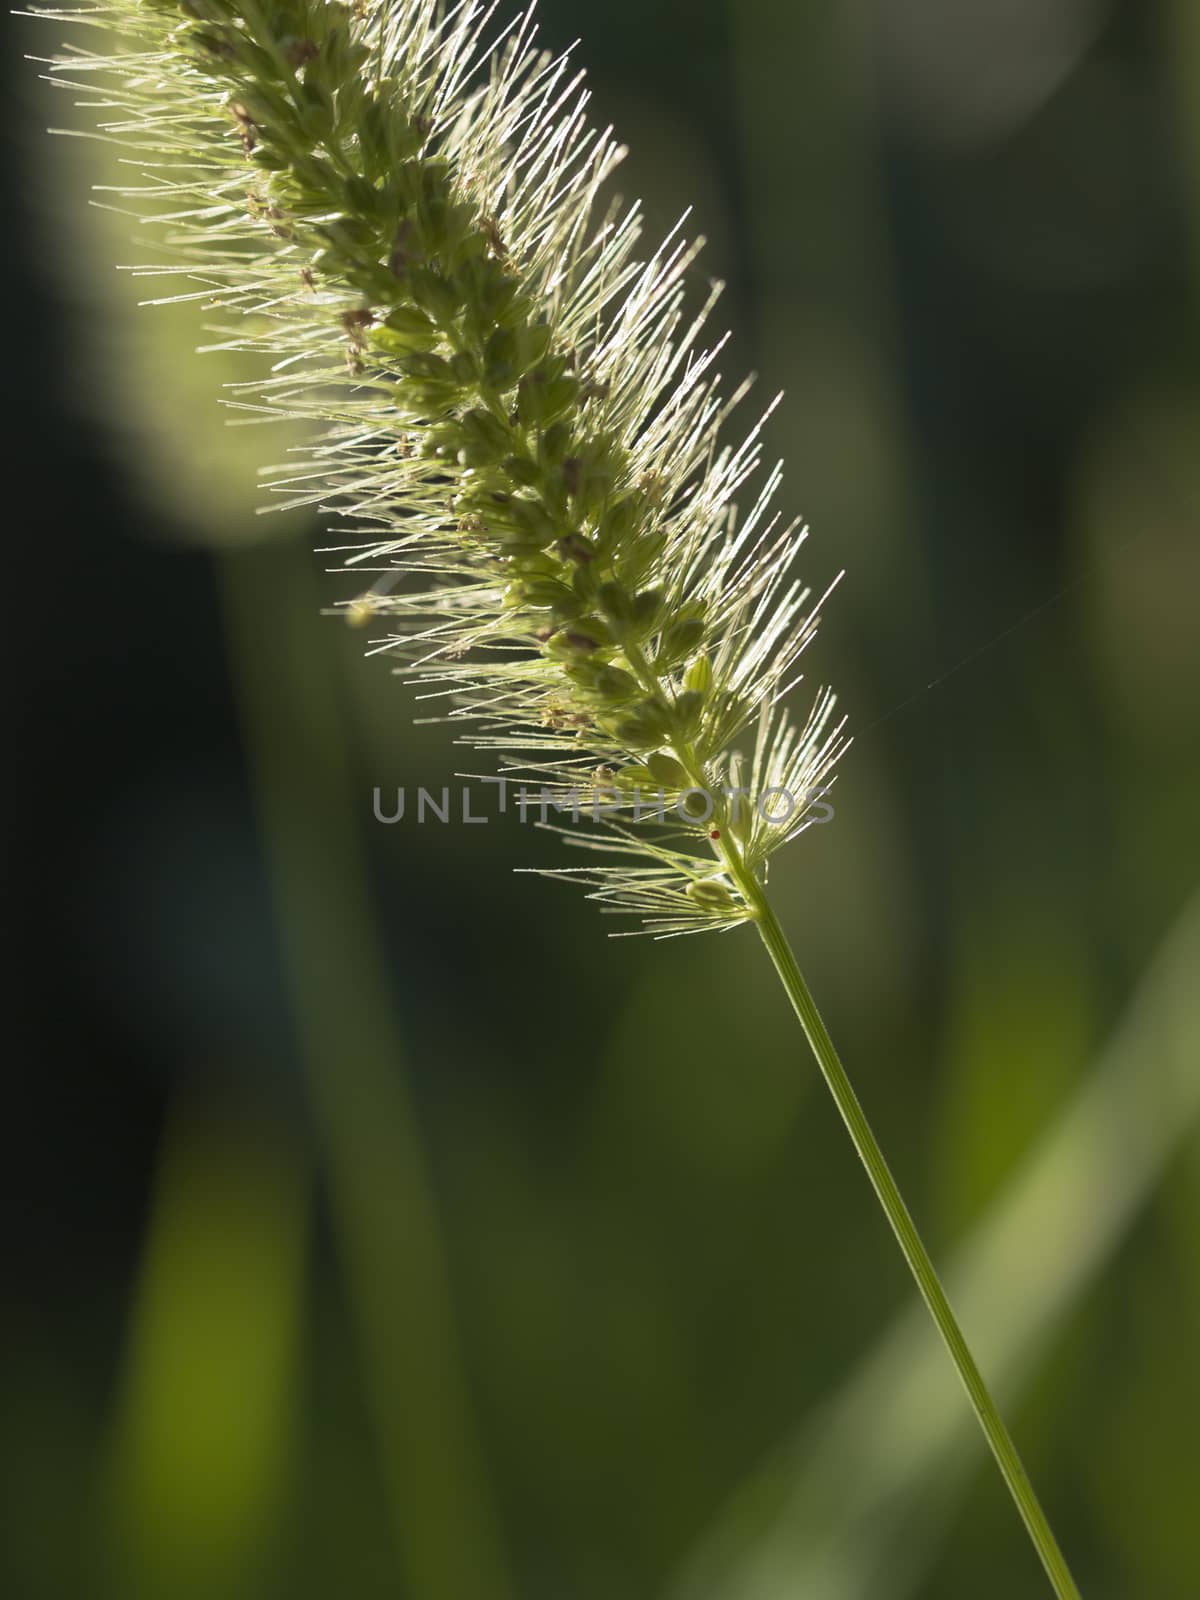 Macro image of a Green Foxtail, or Green Bristle grass (Setaria pumila) inflorescence.